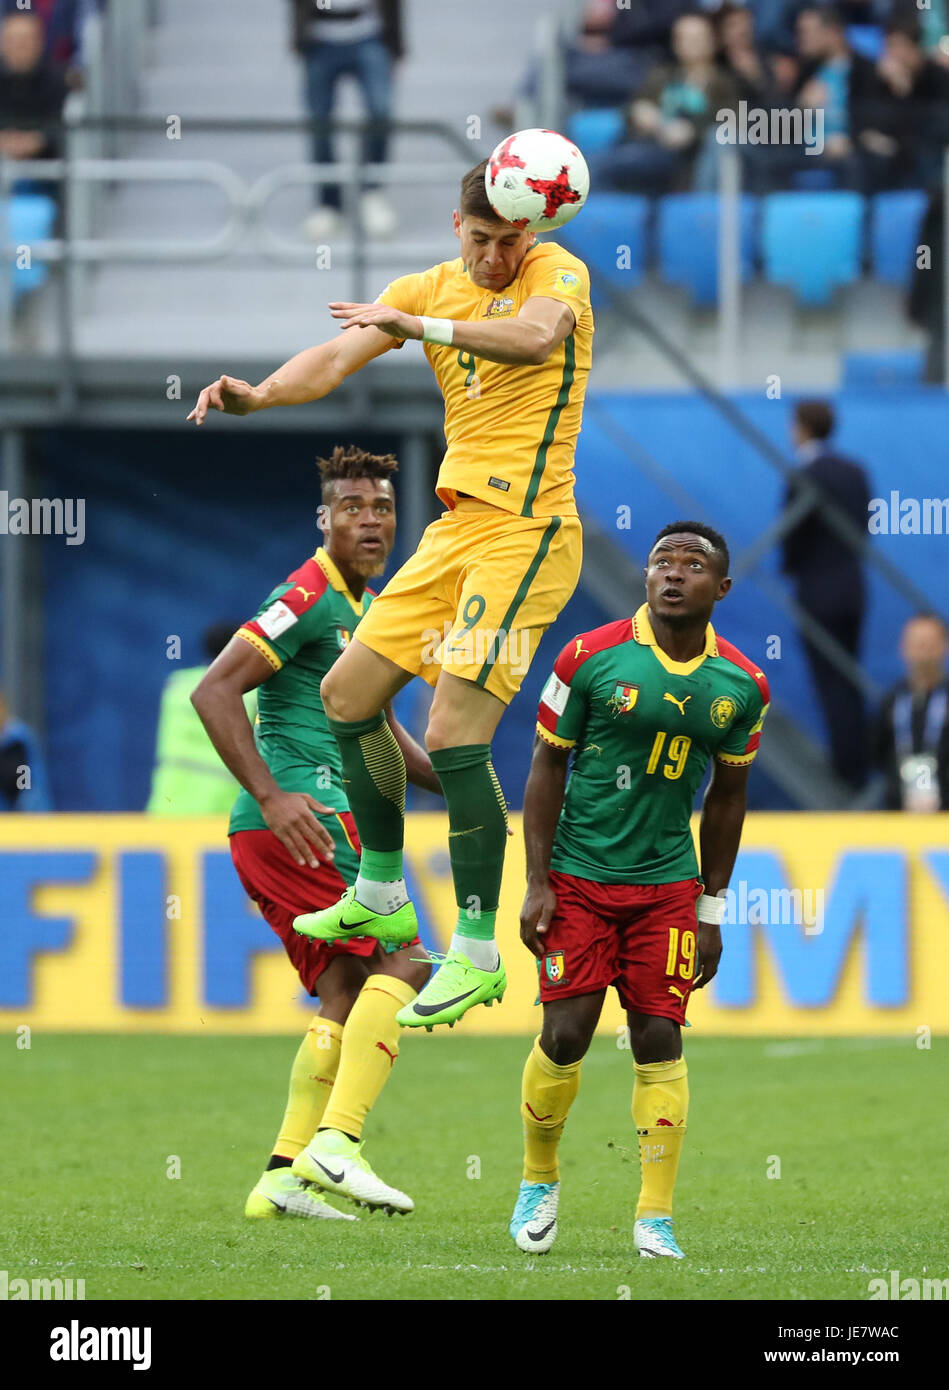 St. Petersburg, Russia. 22nd June, 2017. Tomi Juric (C) of Australia heads the ball during the group B match between Cameroon and Australia at the 2017 FIFA Confederations Cup in St. Petersburg, Russia, on June 22, 2017. The match ended with a 1-1 draw. Credit: Xu Zijian/Xinhua/Alamy Live News Stock Photo